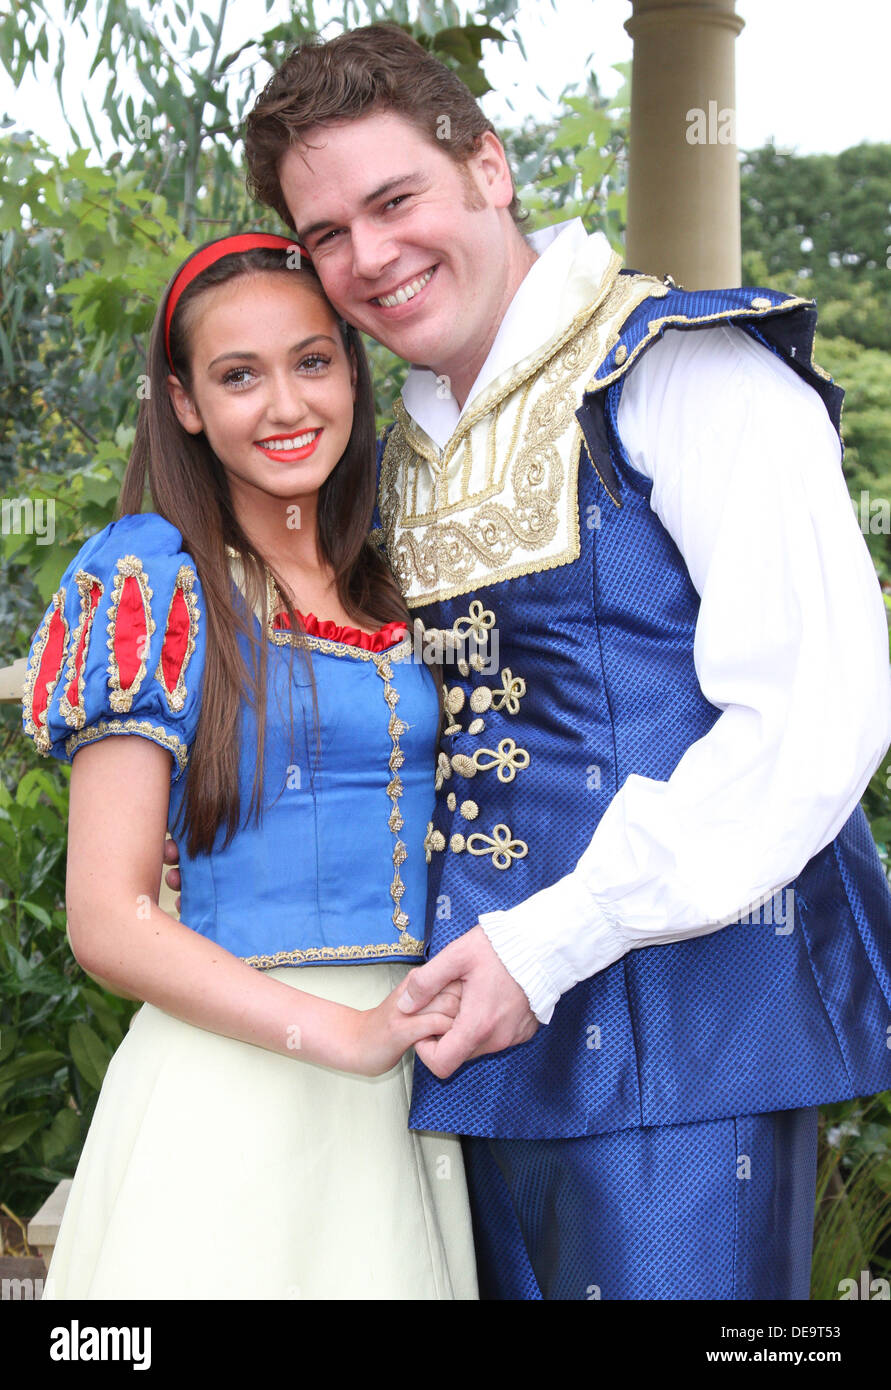 Milton Keynes, UK. 13th Sep, 2013. Milton Keynes Theatre Pantomime Photocall at Frosts Garden Centre, Woburn Sands, Milton Keynes with cast members Warwick Davis, Jennifer Ellison, Kate Stewart and Shaun Dalton. This year's Panto opens on Friday December 6th and finishes on Sunday January 12th 2014. © KEITH MAYHEW/Alamy Live News Stock Photo